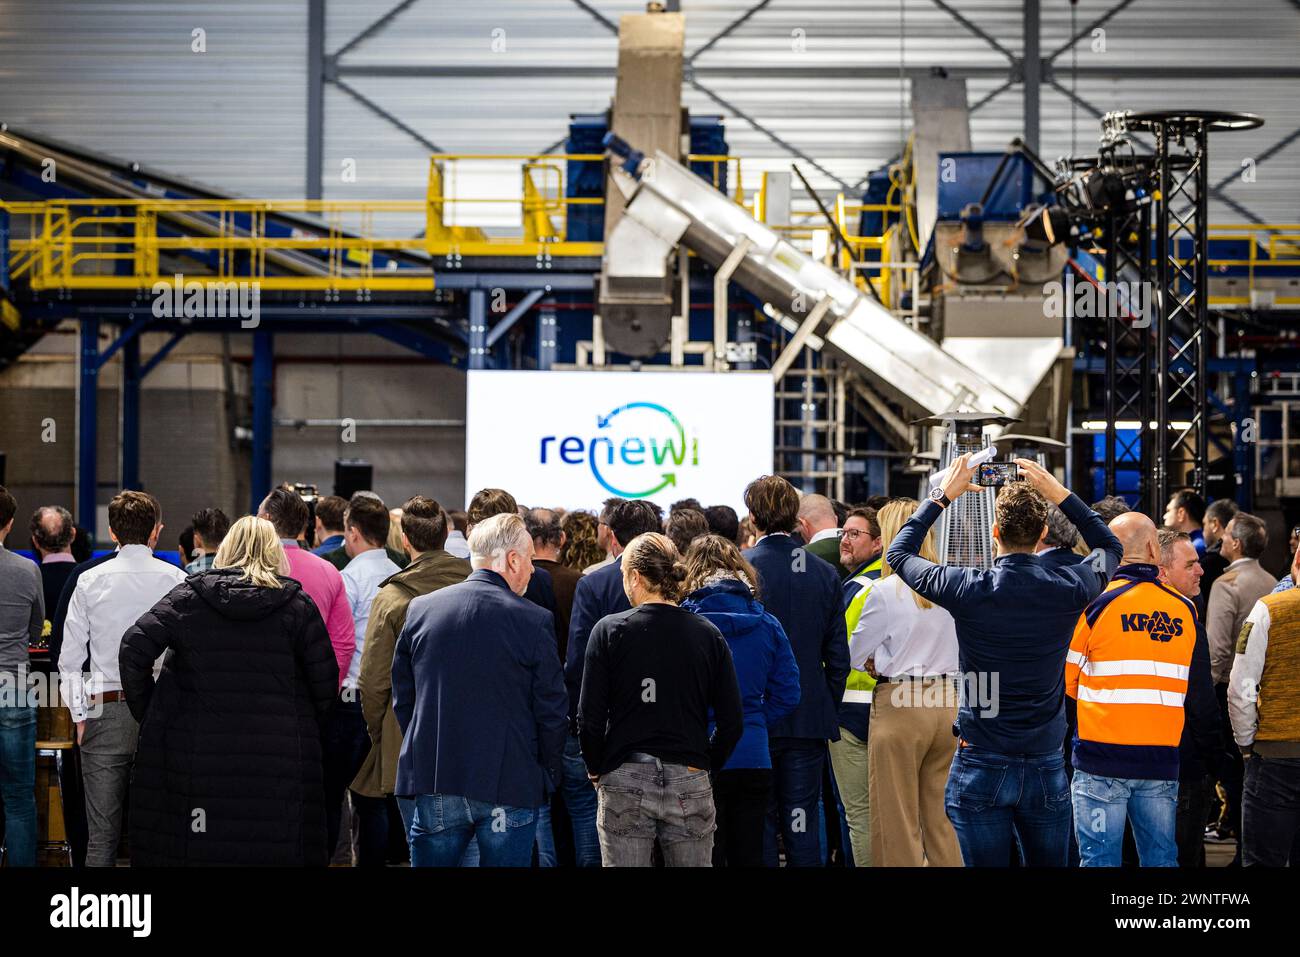 EINDHOVEN - The opening of the new plastic sorting installation of waste worker Renewi. According to the company, only a third of plastic waste is recycled. With the opening of this installation, Renewi wants to increase that percentage. ANP ROB ENGELAAR netherlands out - belgium out Stock Photo